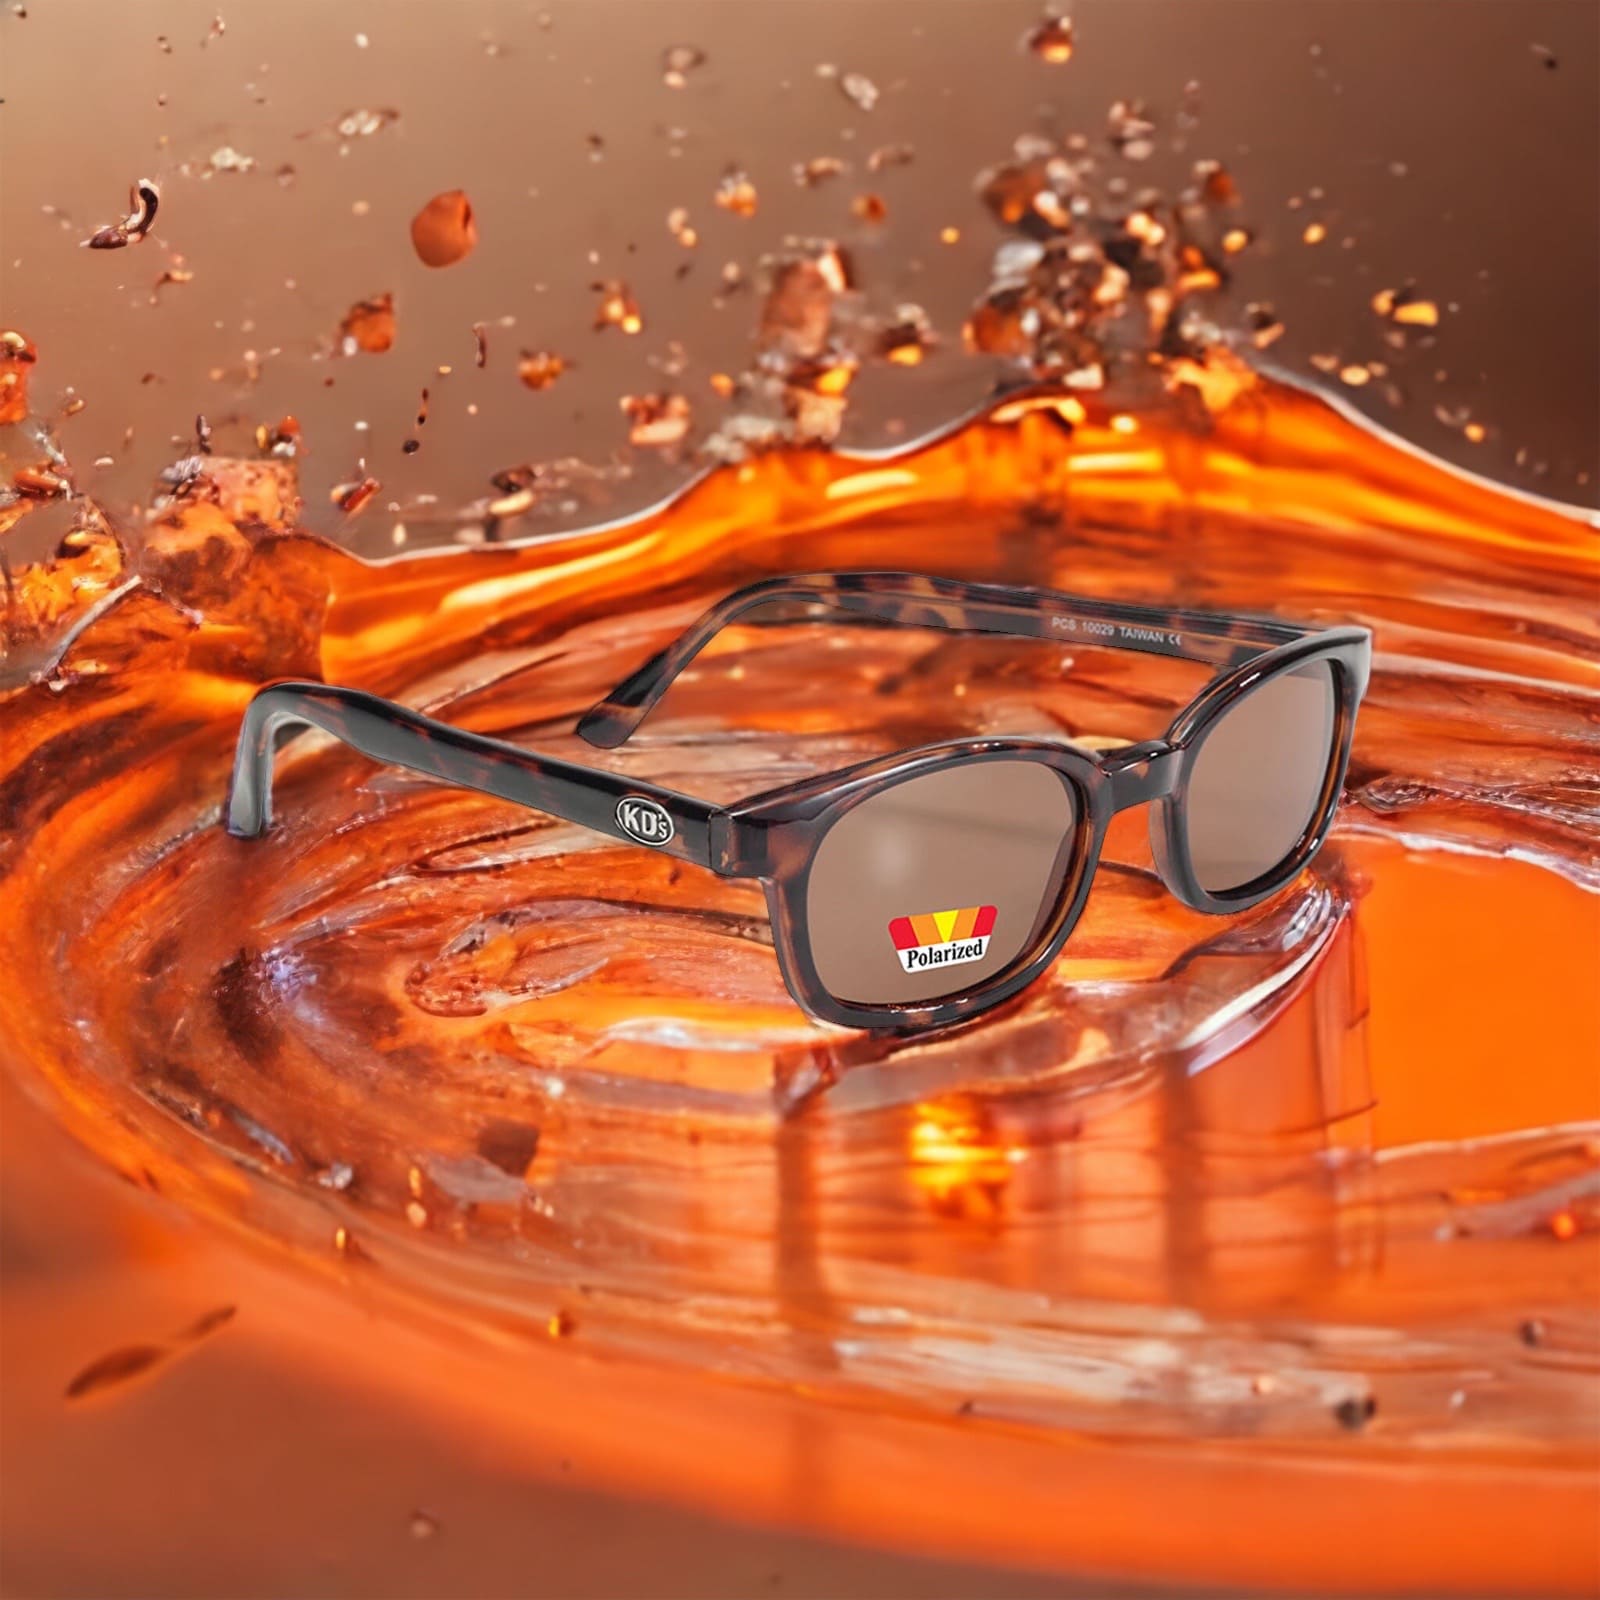 X-KD's 10029 large sunglasses with polarized amber polycarbonate lenses and a tortoise shell frame set in water.